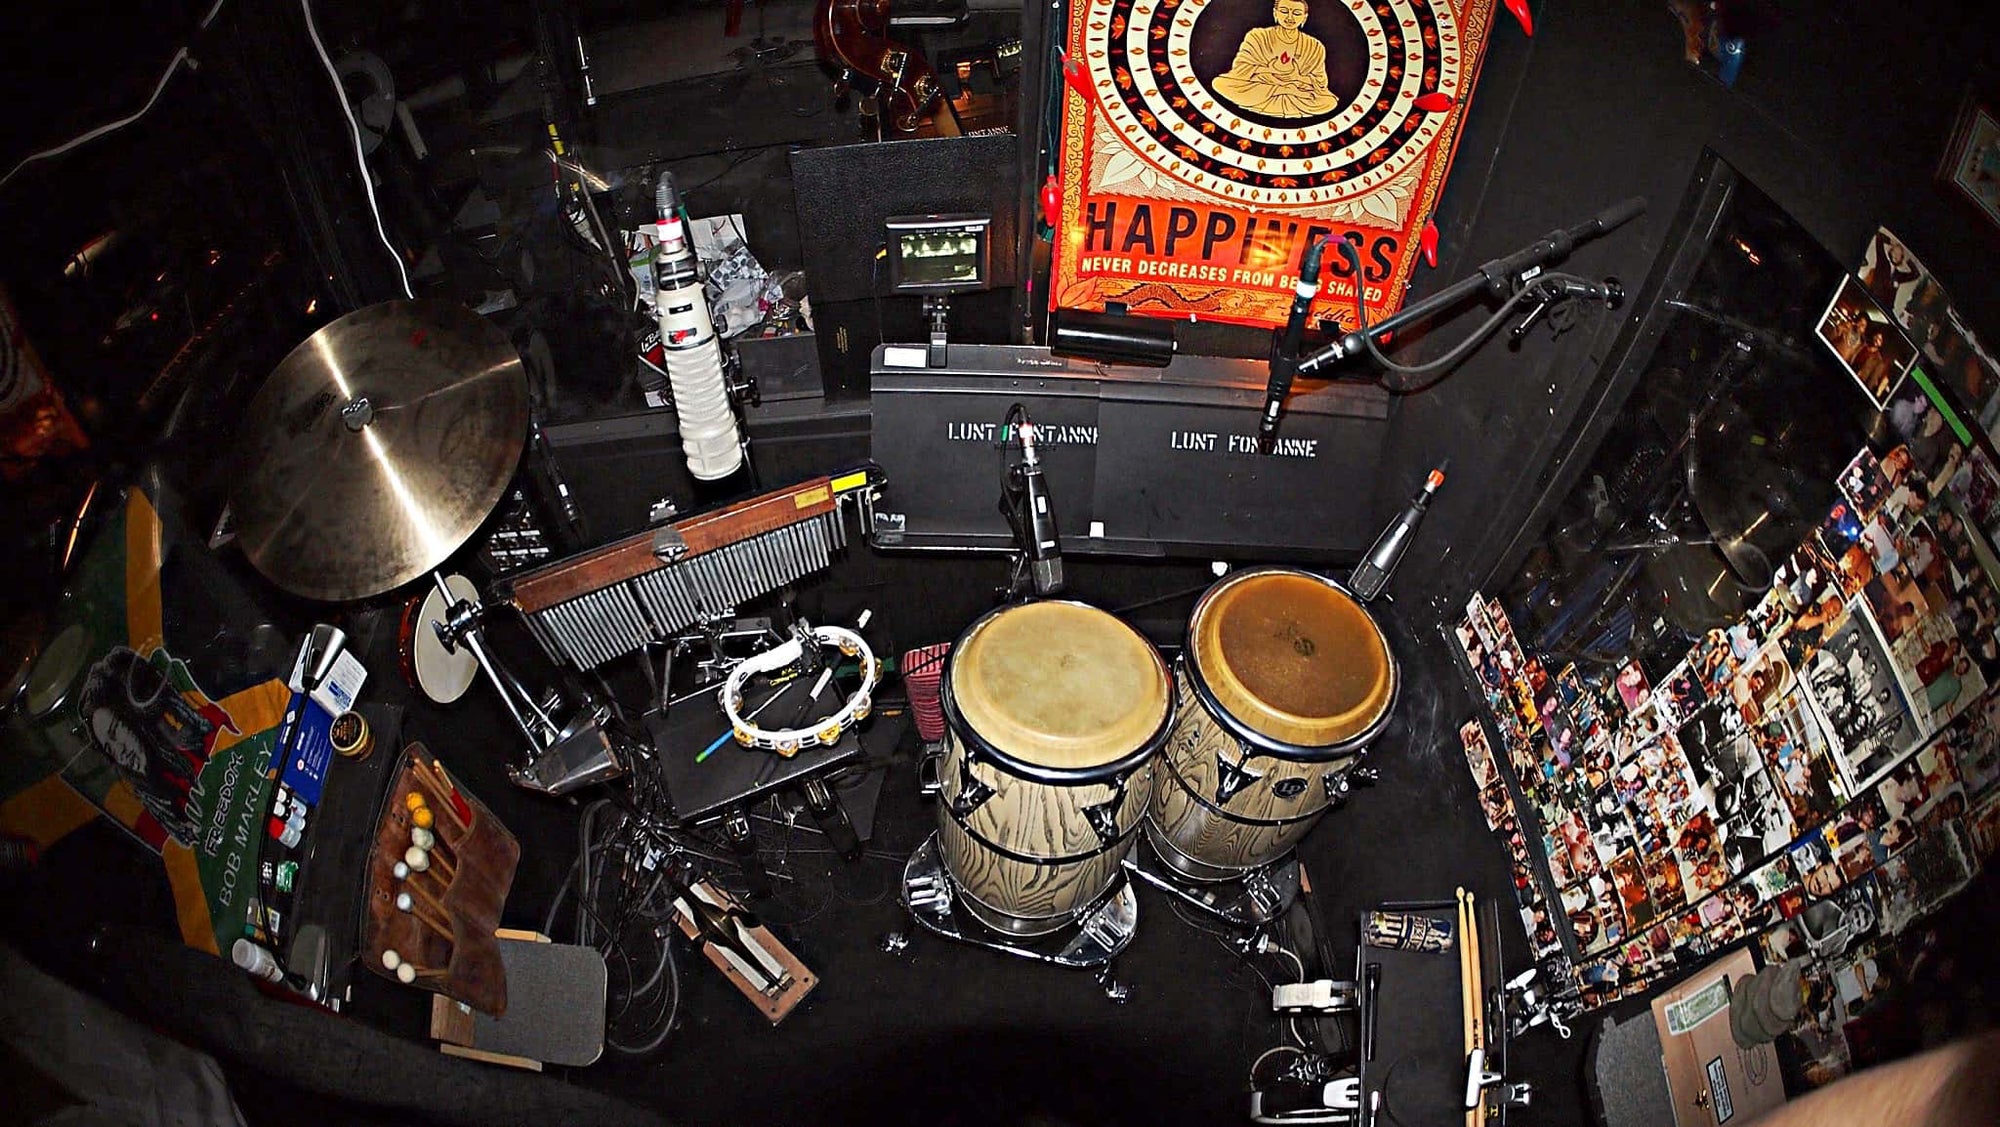 Roger Squitero's hand drum setup for the Broadway production of Motown at the Lunt-Fontanne Theatre.